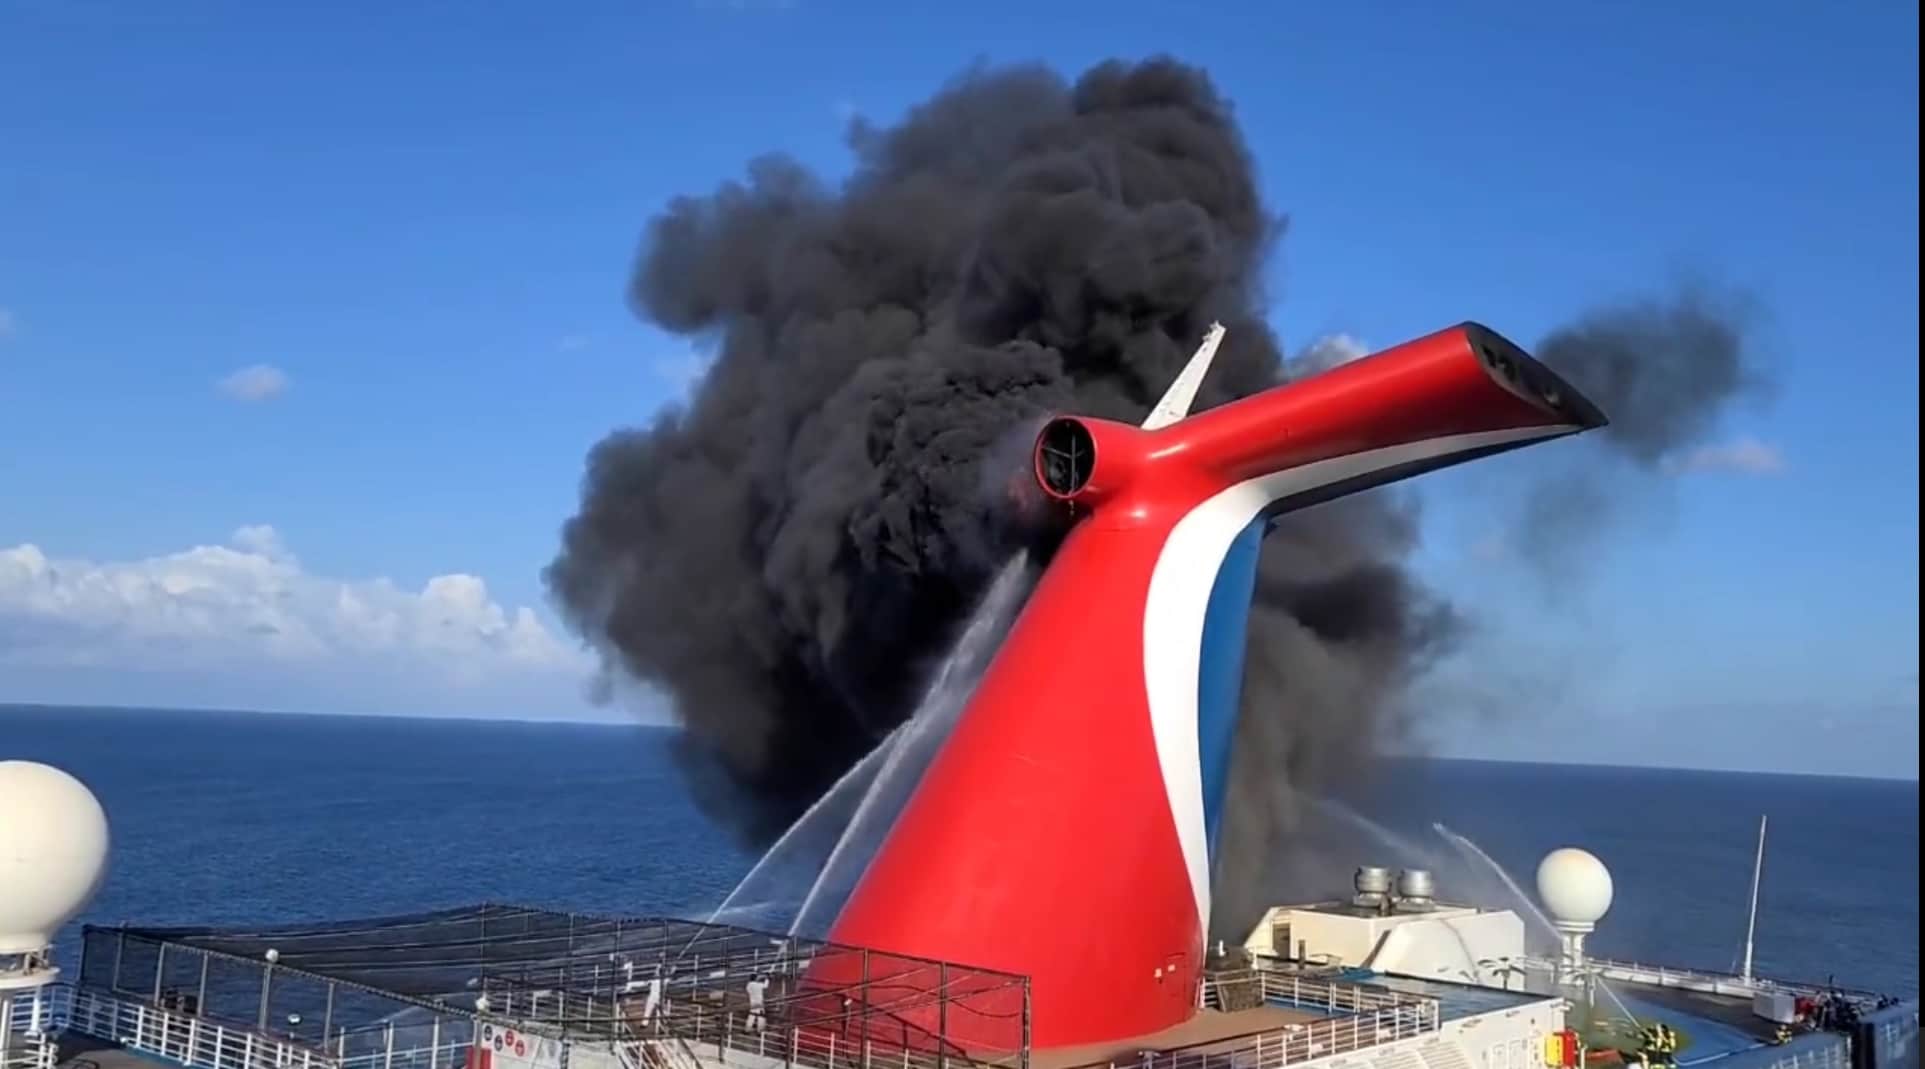 carnival cruise fin on fire